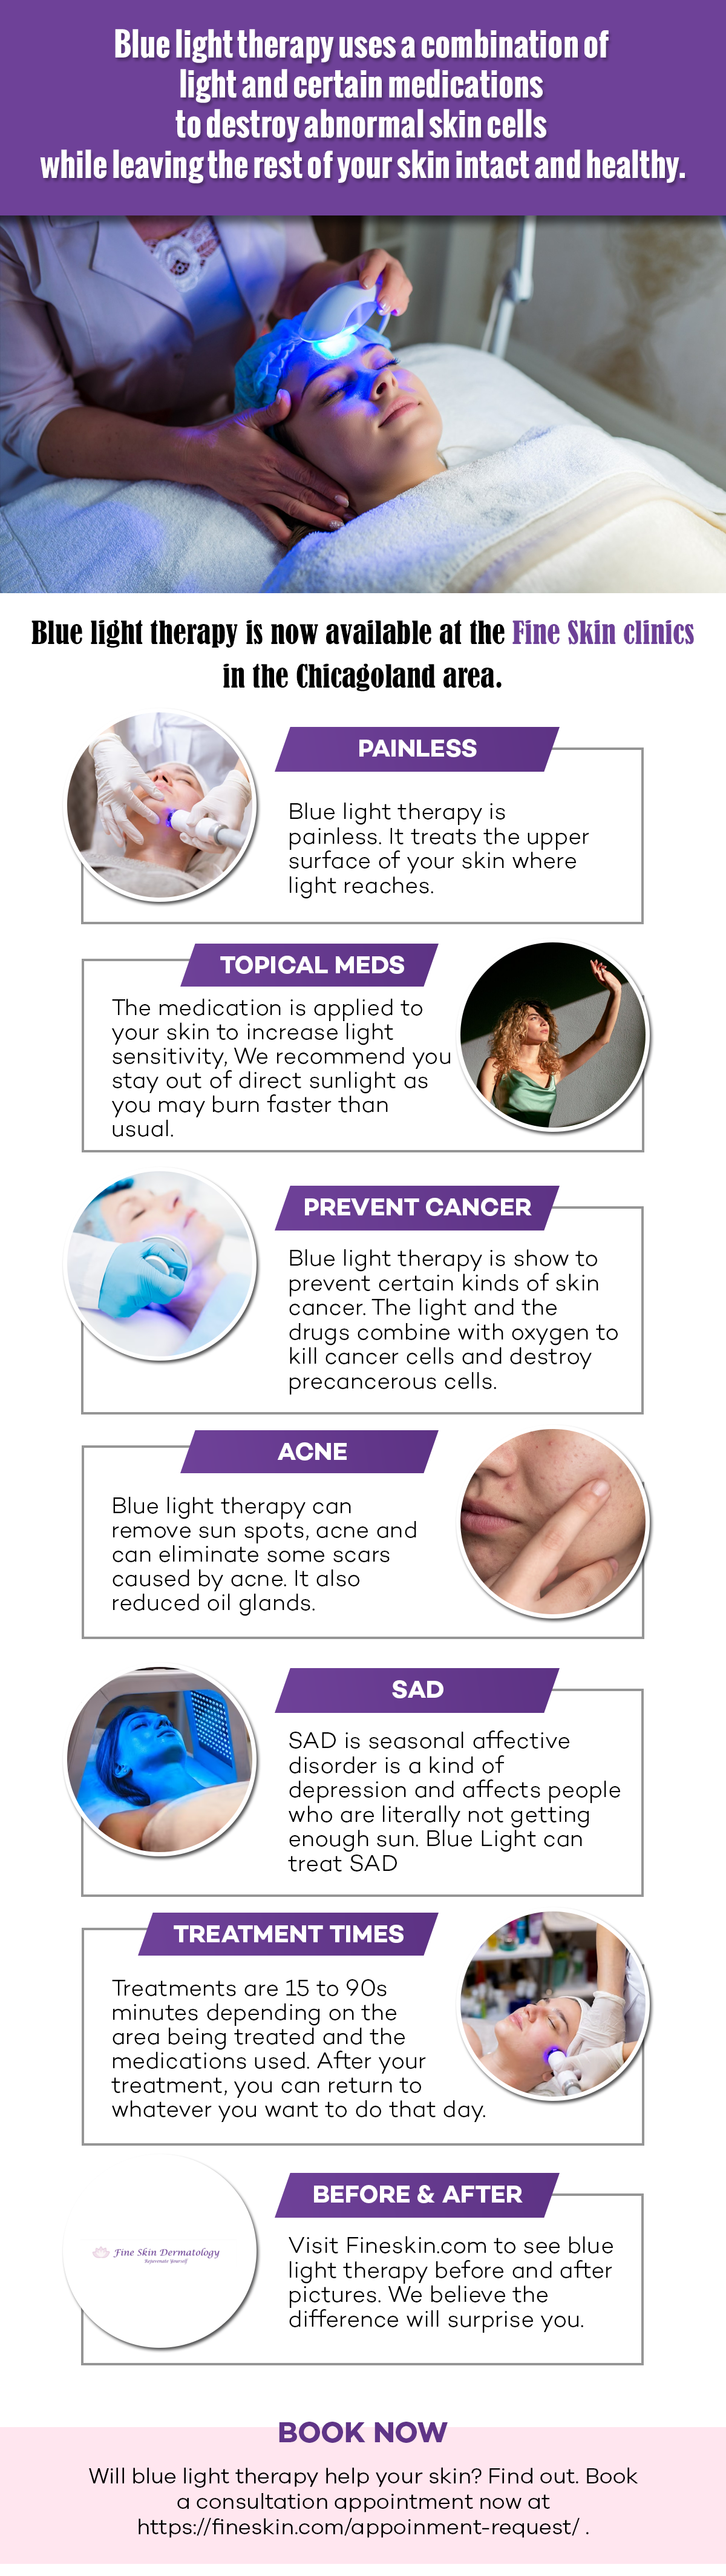 FAQs About Blue Light Therapy For Precancerous Skin Lesions